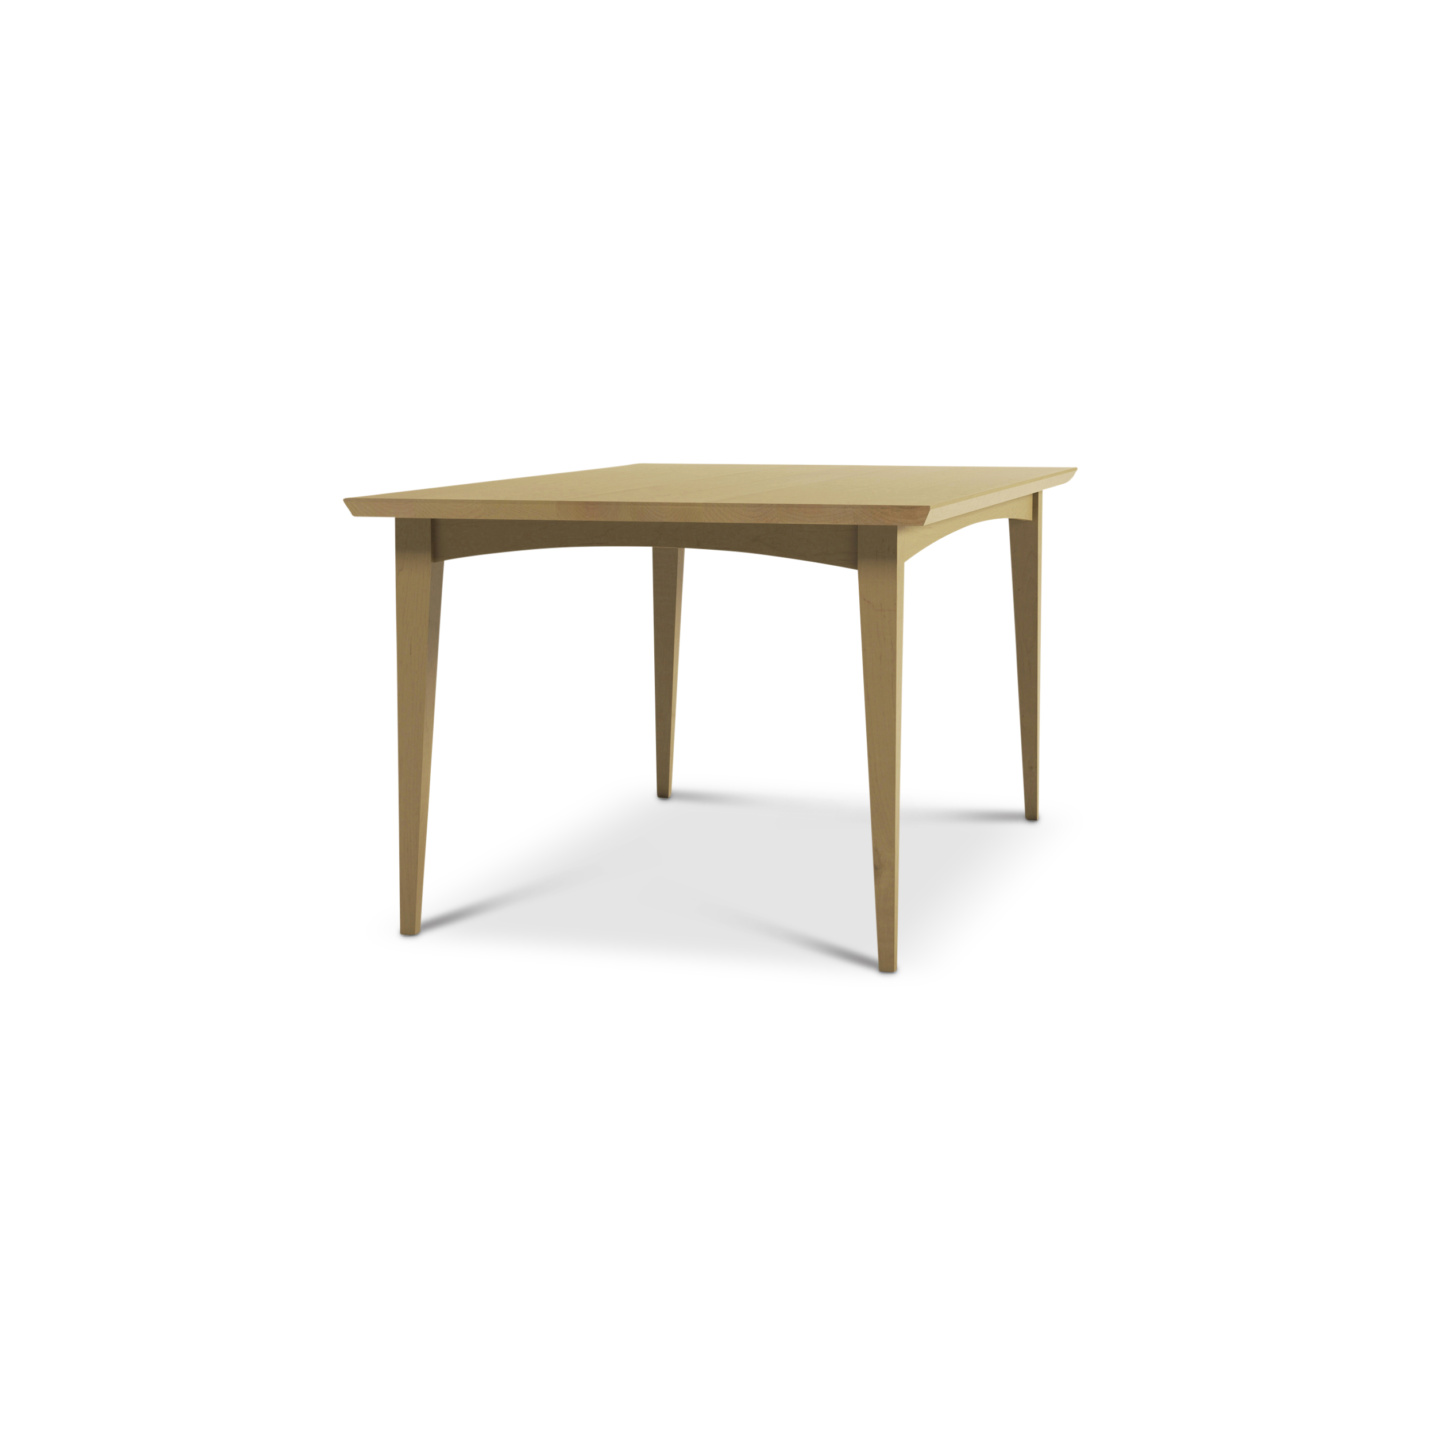 Maple dining room table with solid wood legs